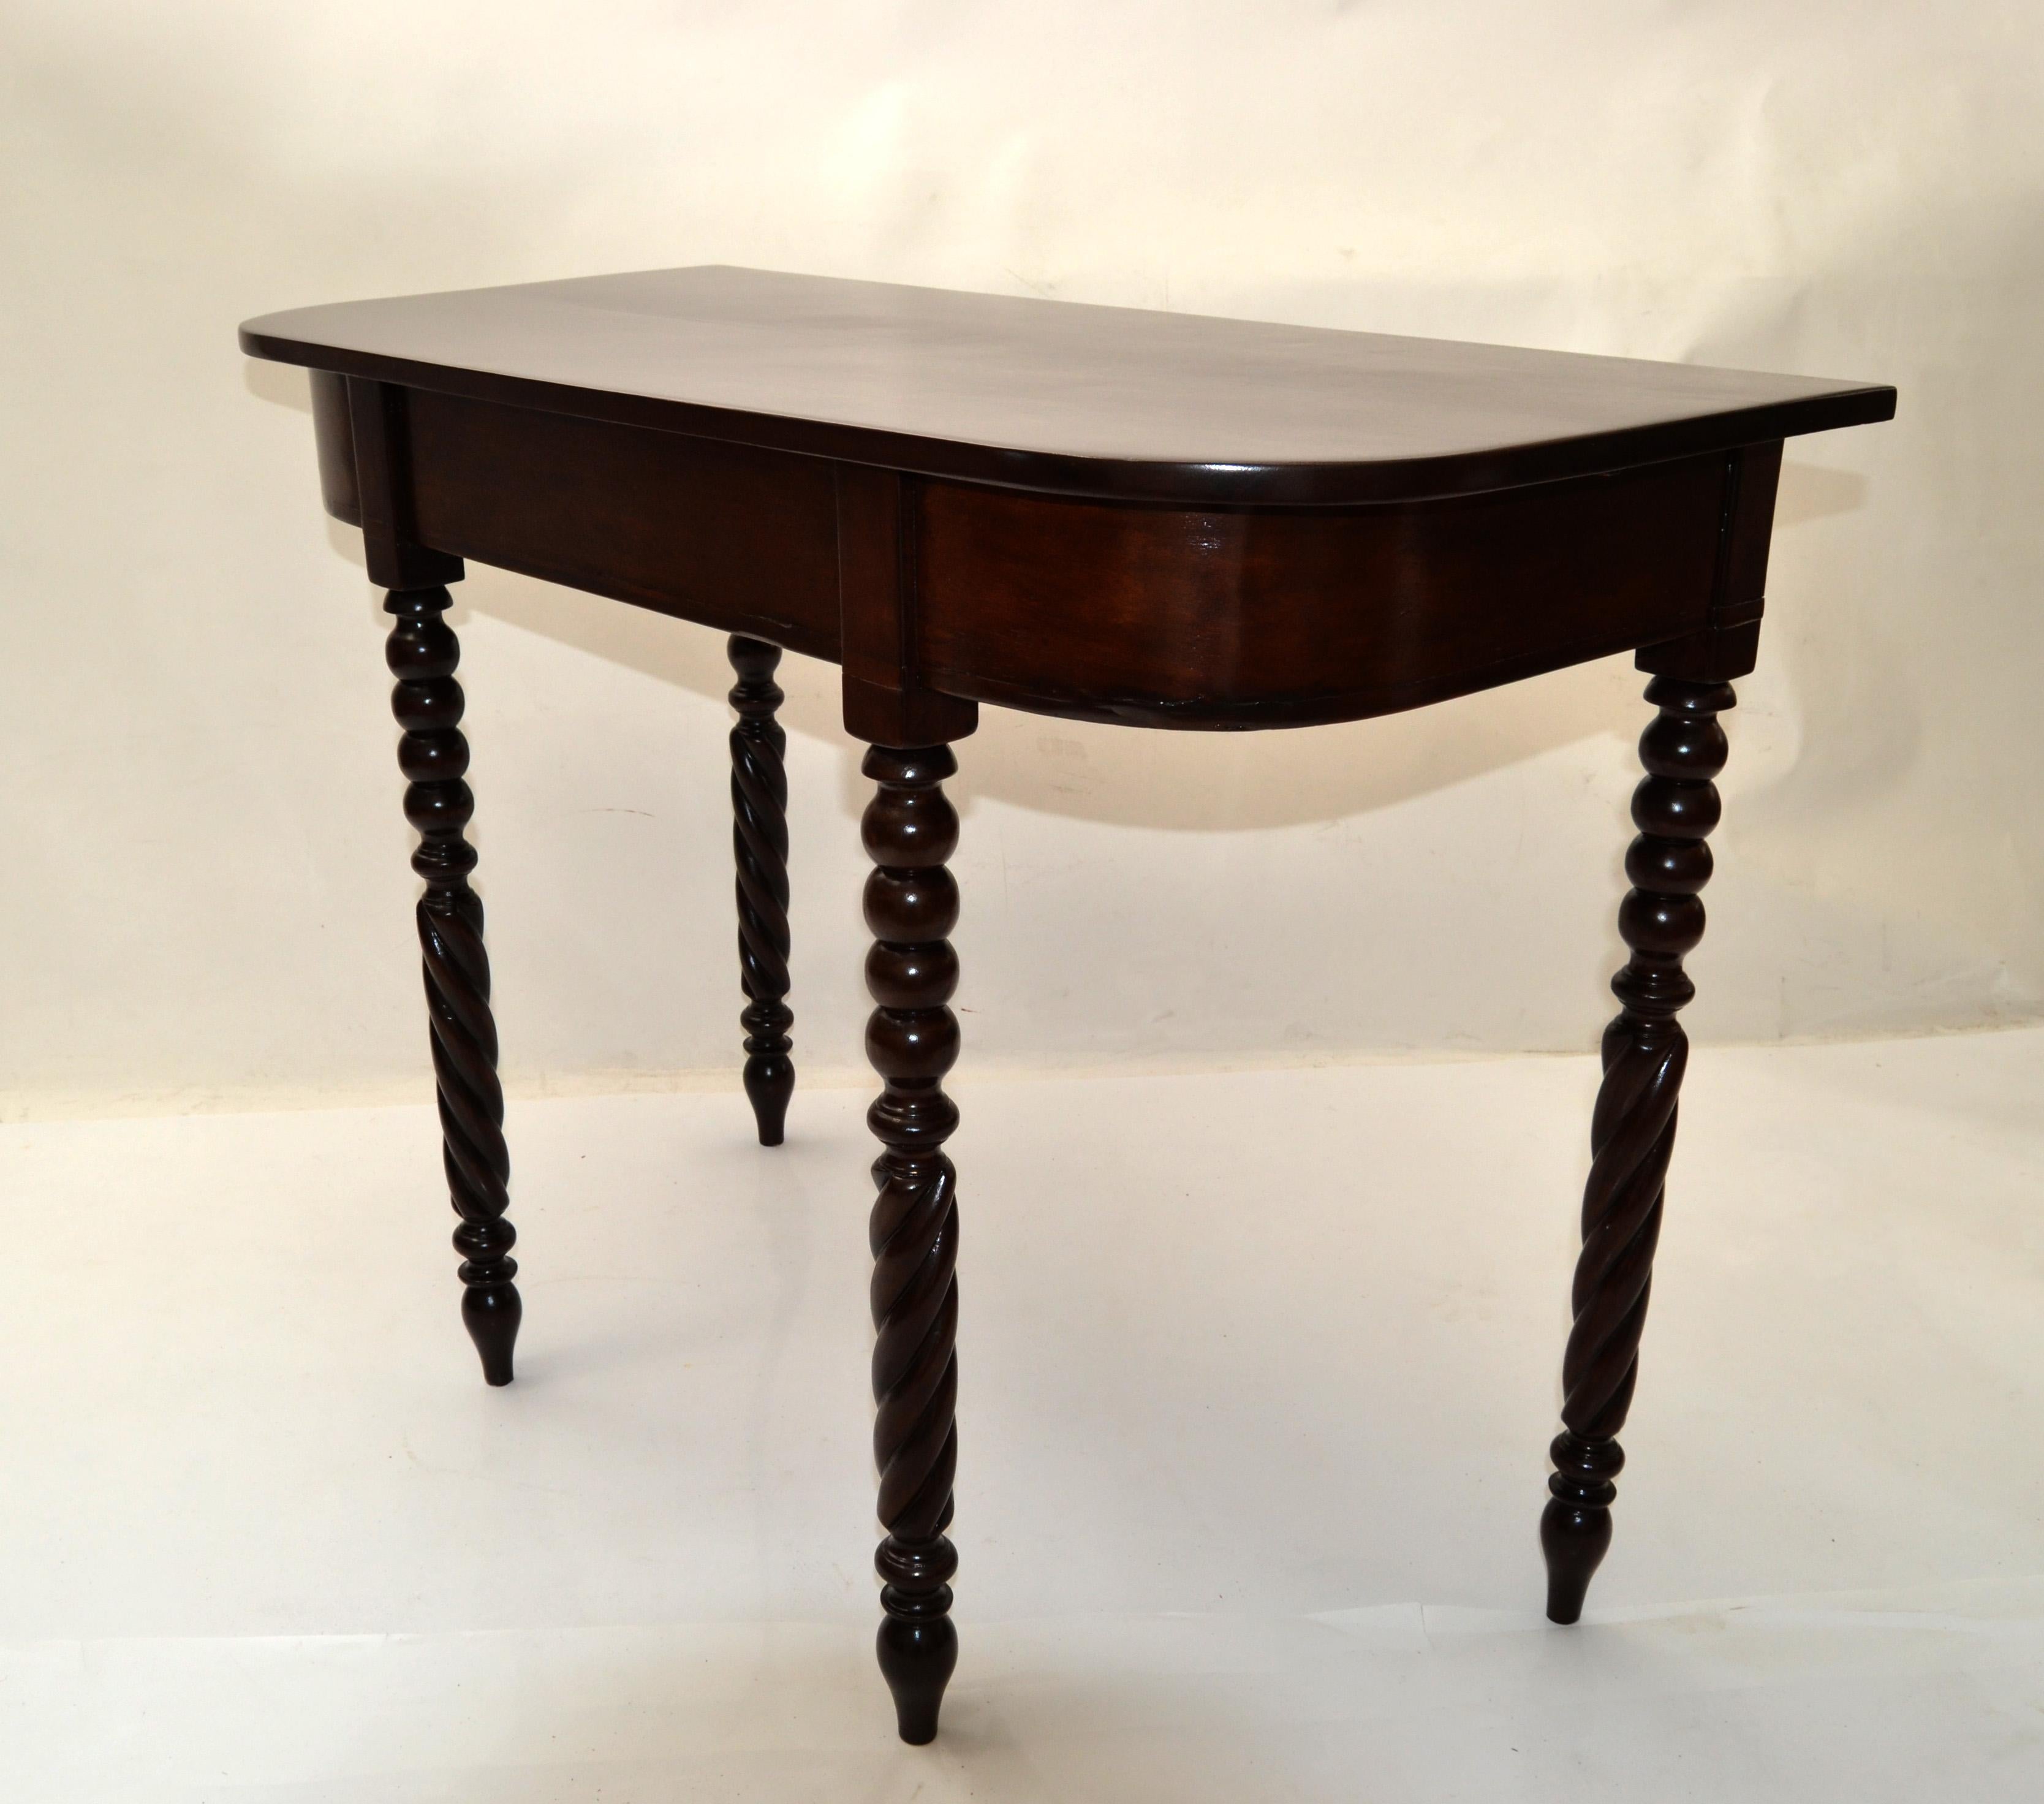 Neoclassical 19th Century Brown Finish Console or Hallway Table Vanity Turned Tapered Legs For Sale